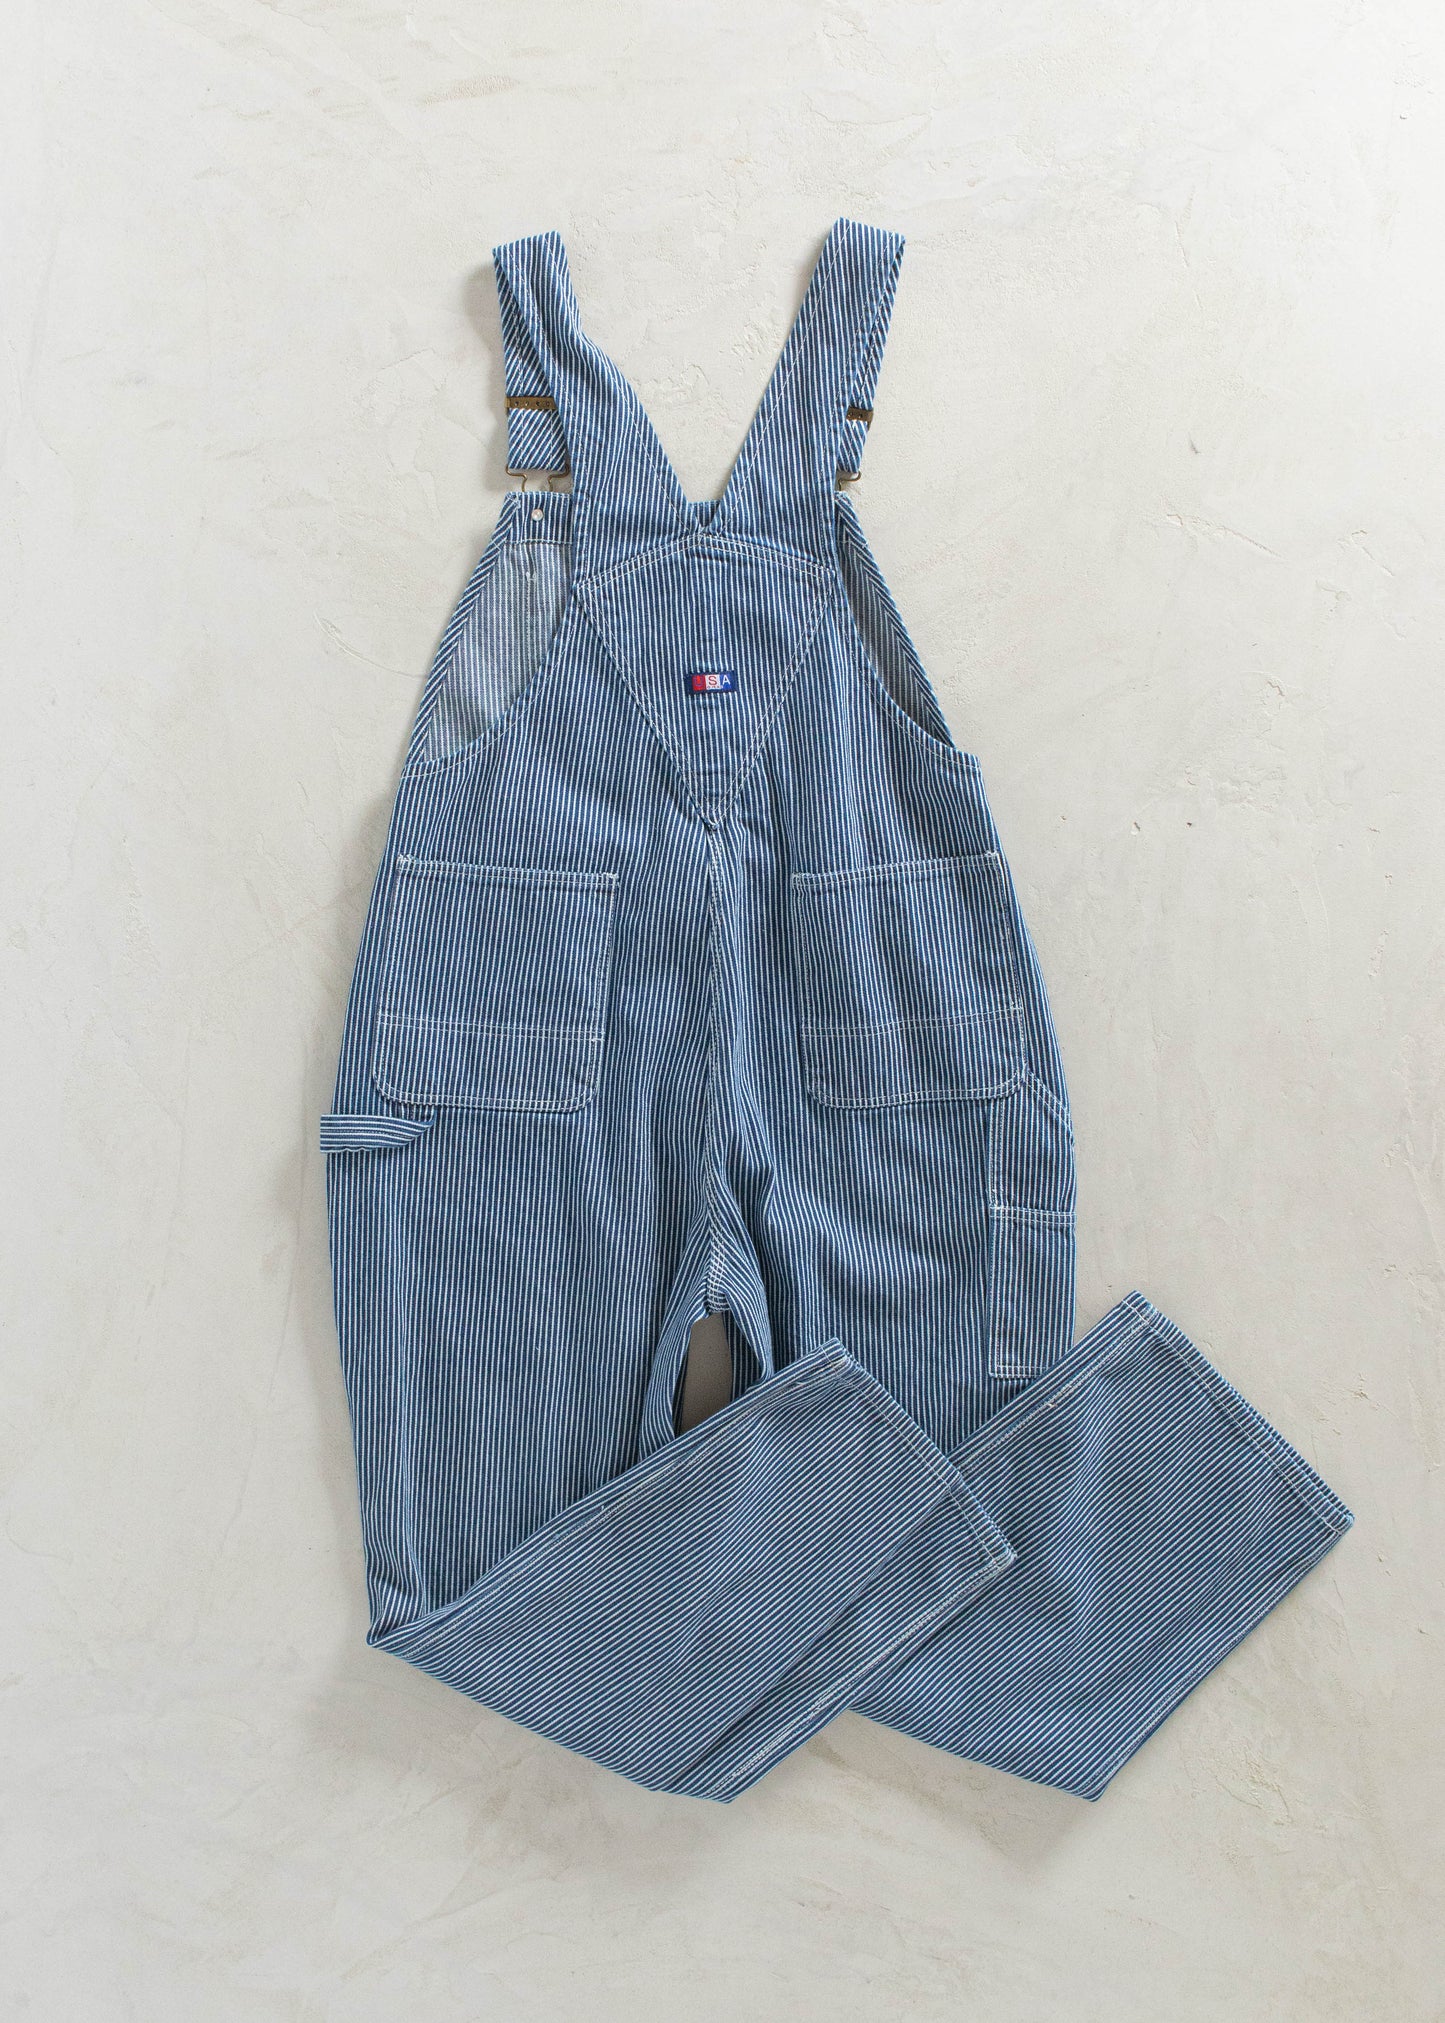 1980s USA Works Deadstock Hickory Stripes Overalls Size L/XL